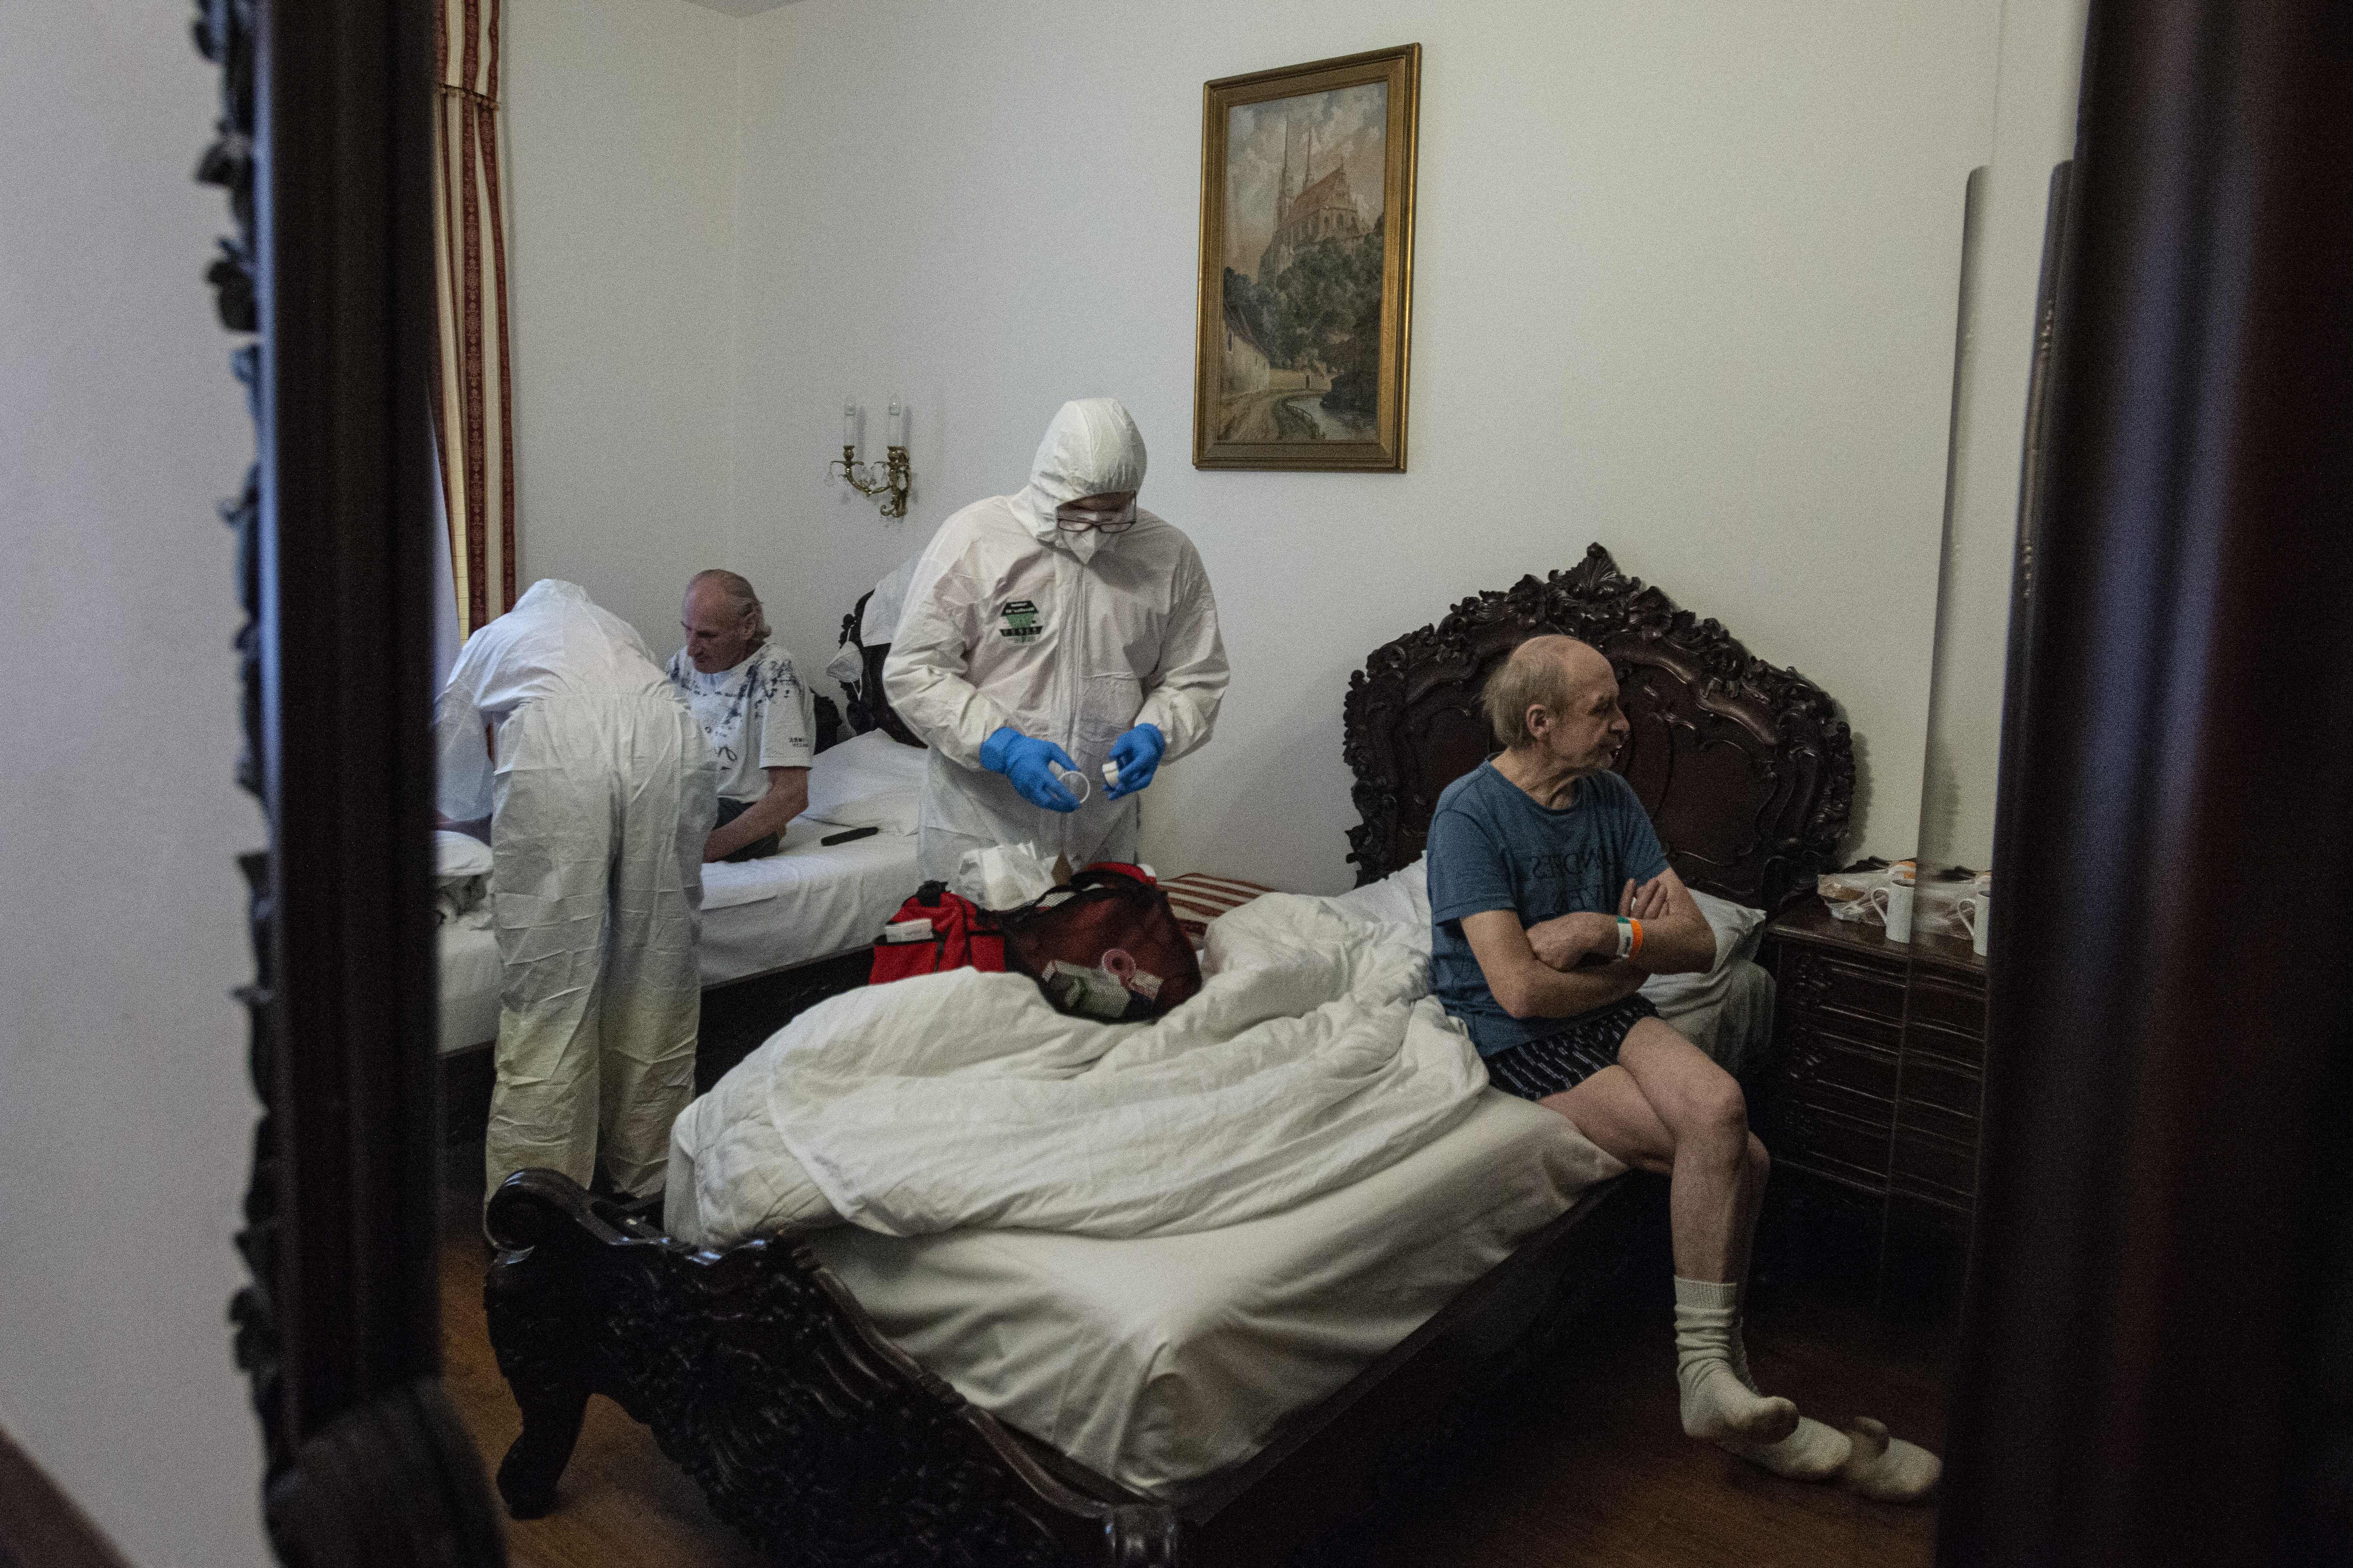 Healthcare workers in personal protective equipment (PPE) look after a homeless coronavirus patients, in a hotel room in Prague on March 8